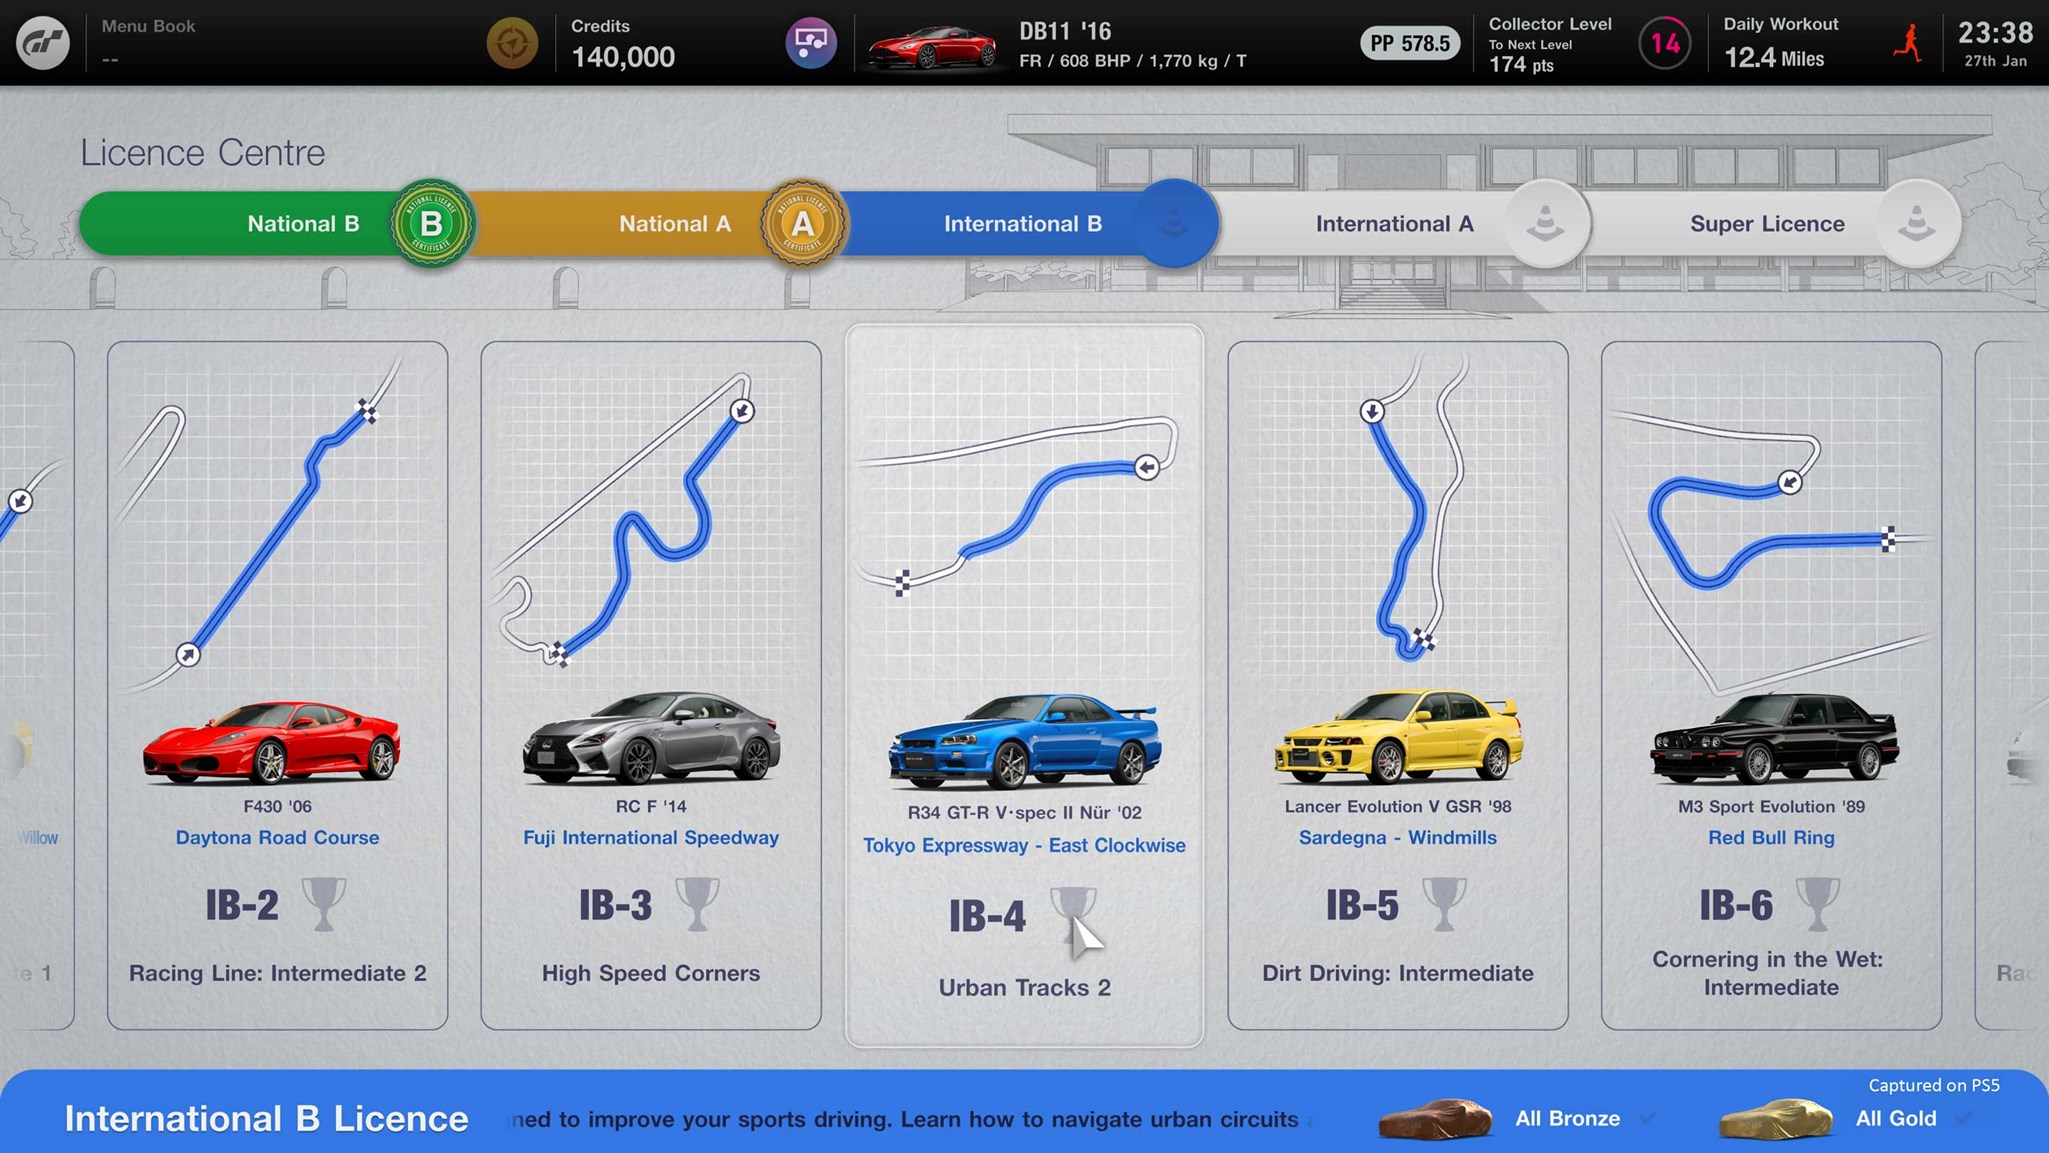 Here's Why Gran Turismo 7 Campaign Mode Requires Internet